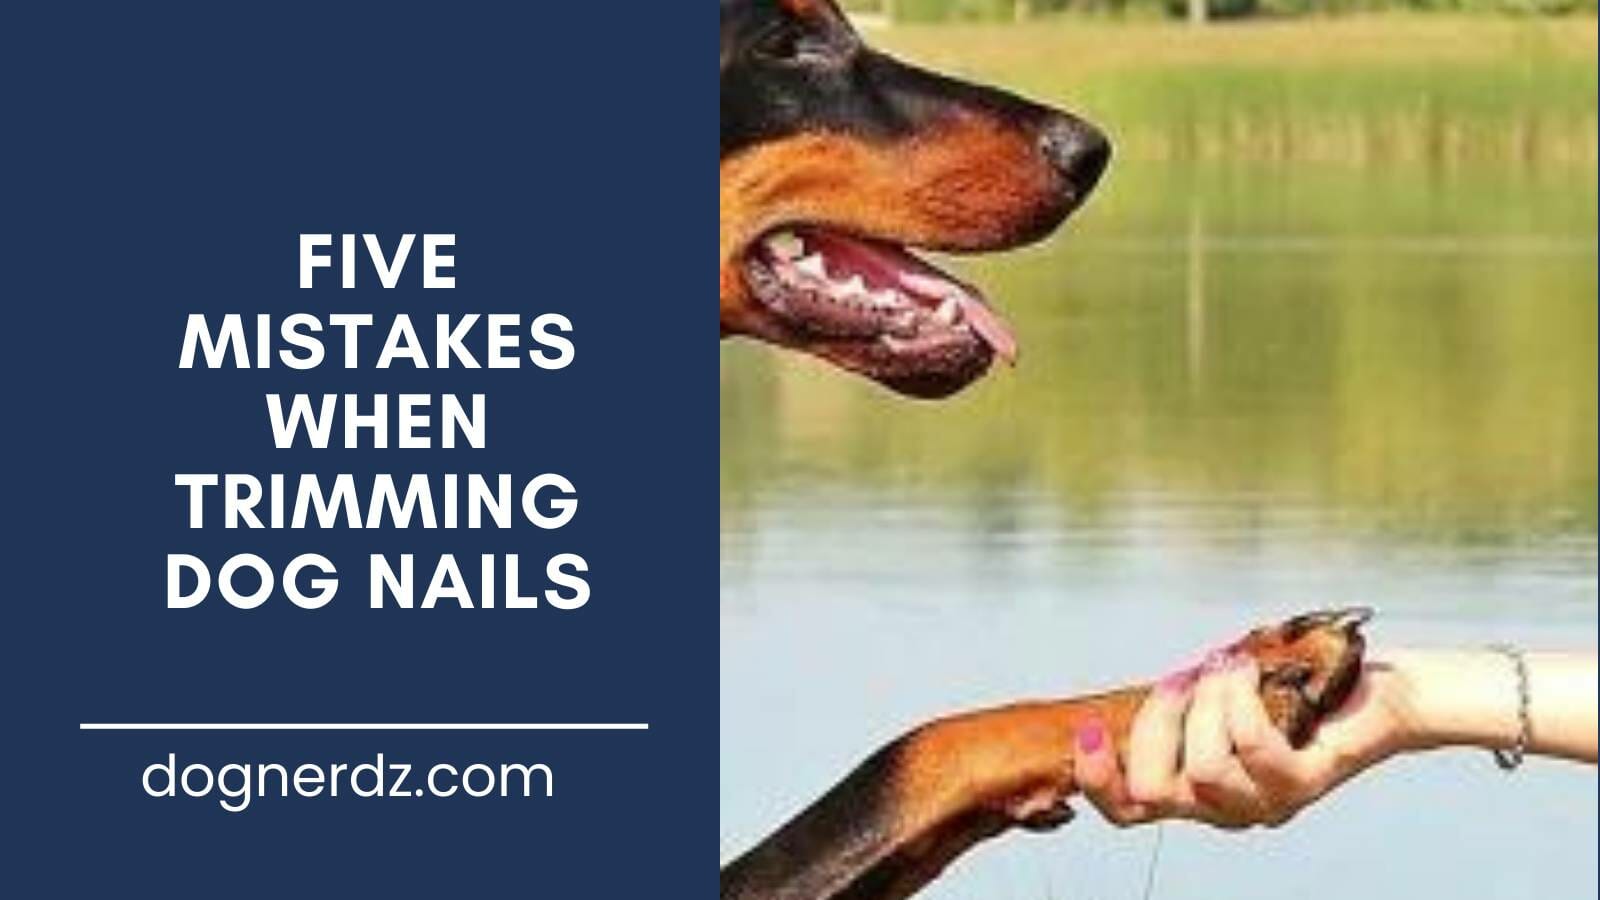 guide on five mistakes when trimming dog nails